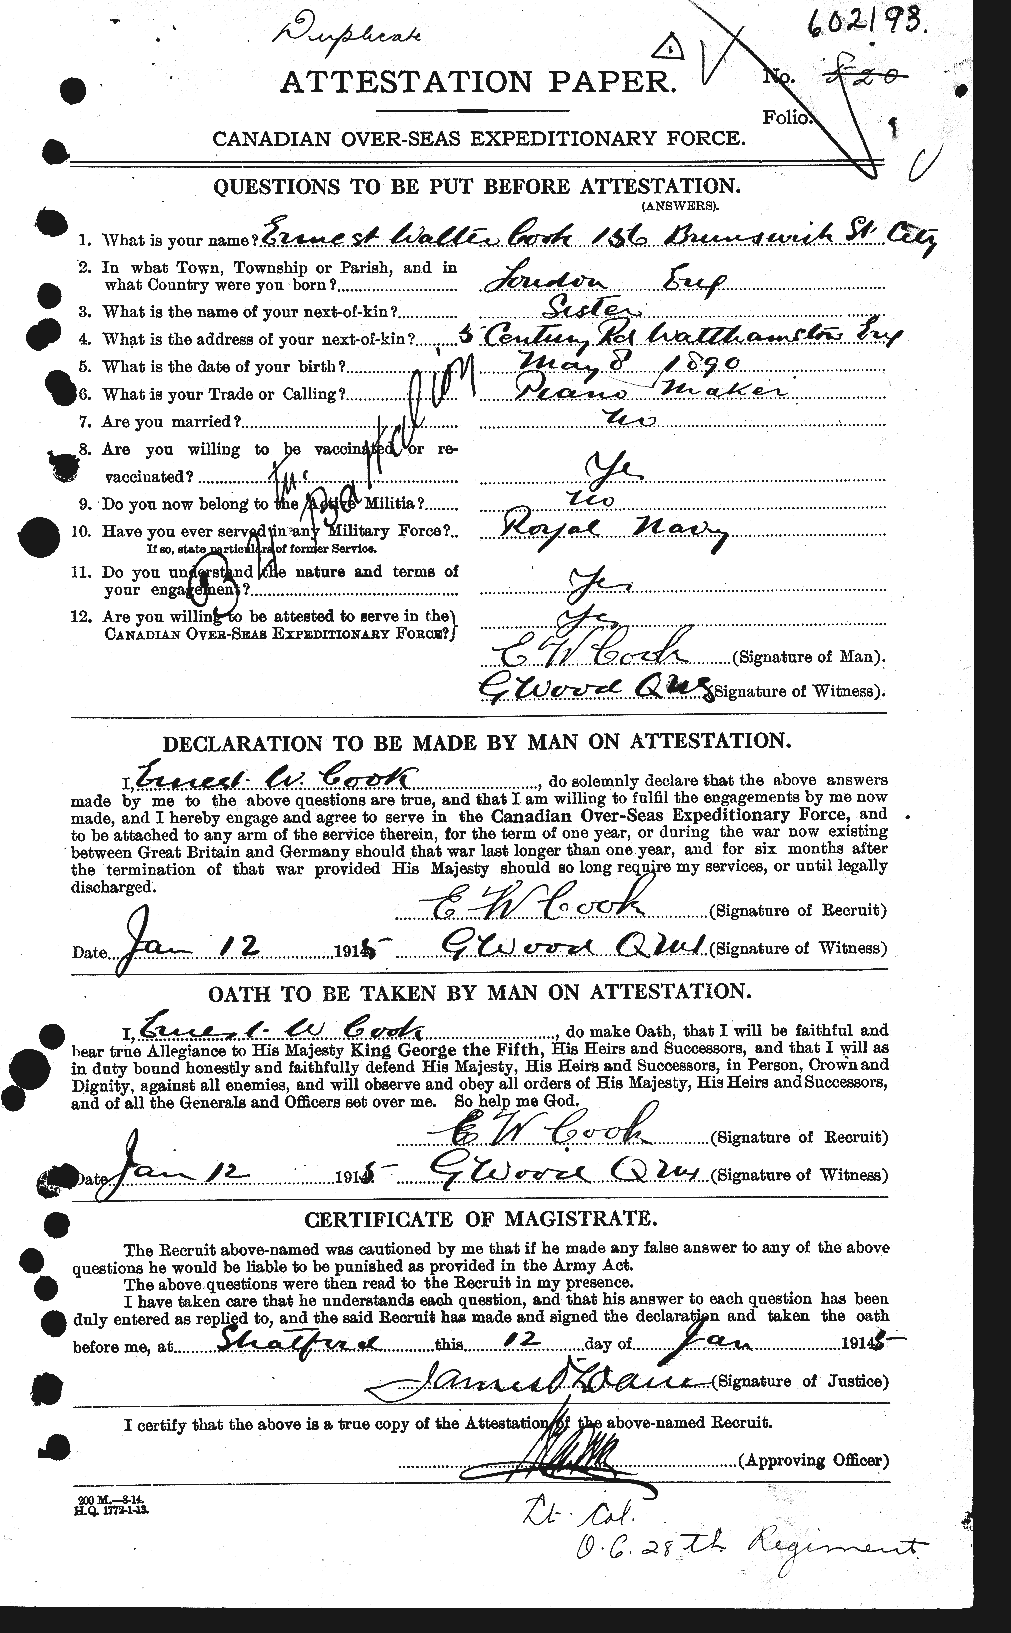 Personnel Records of the First World War - CEF 073916a